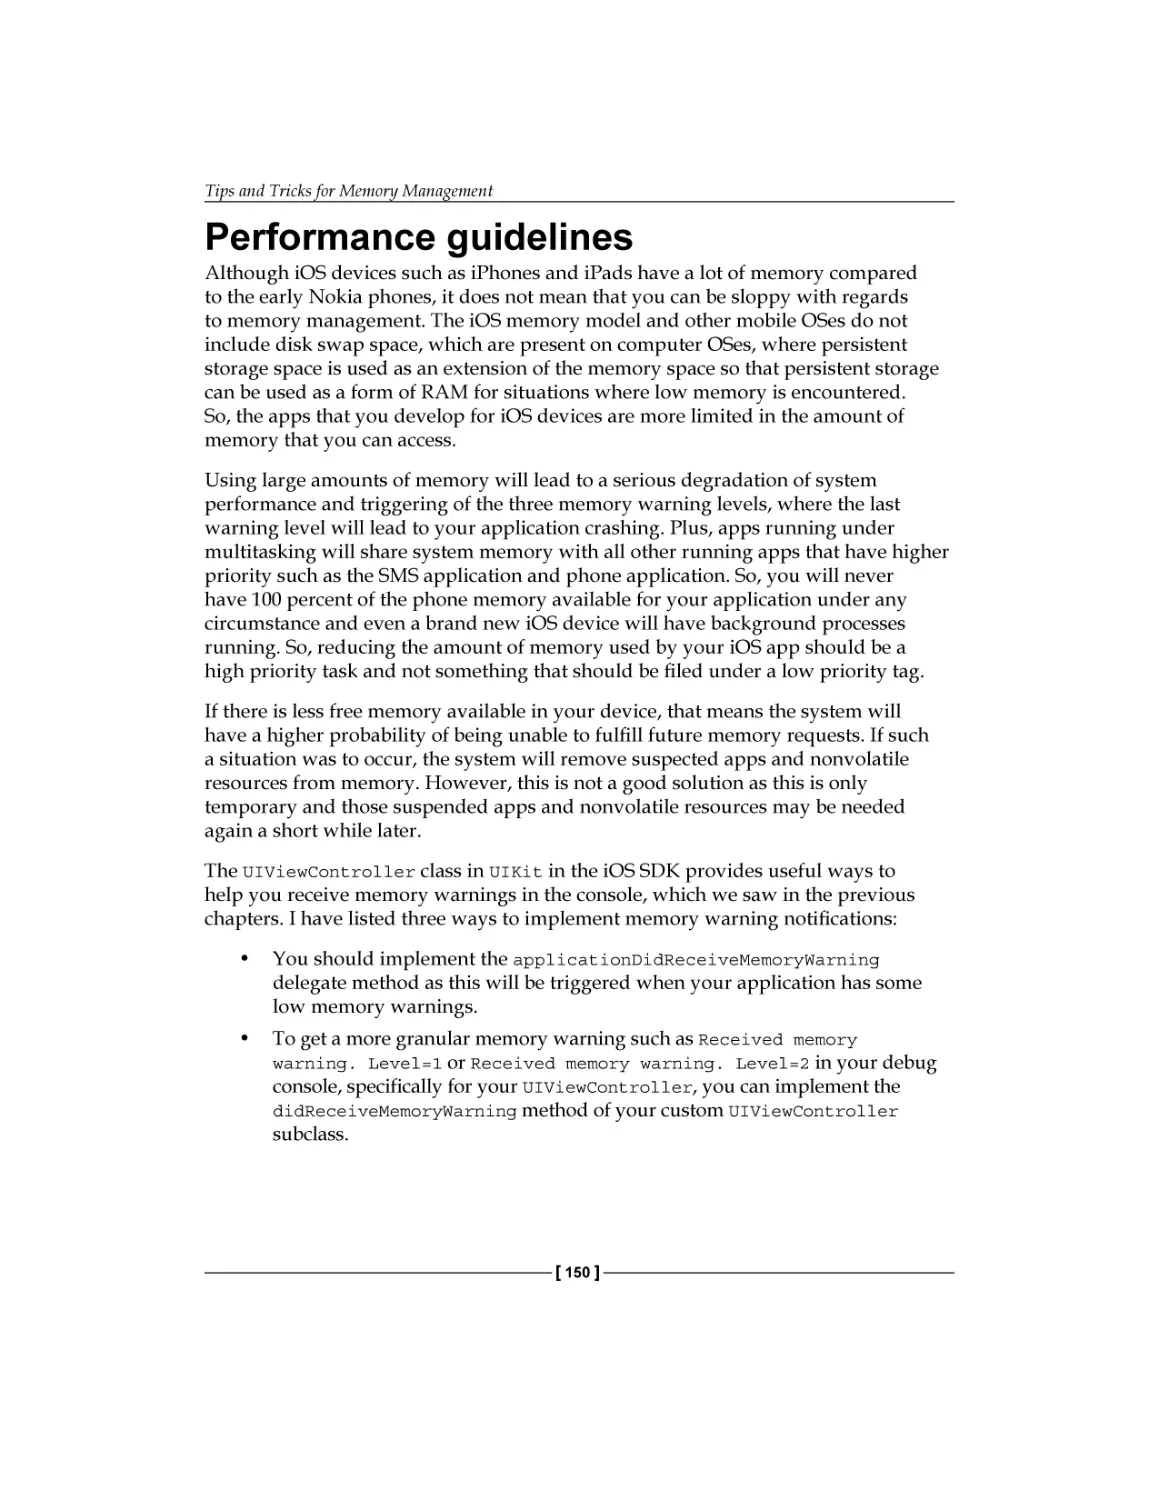 Performance guidelines